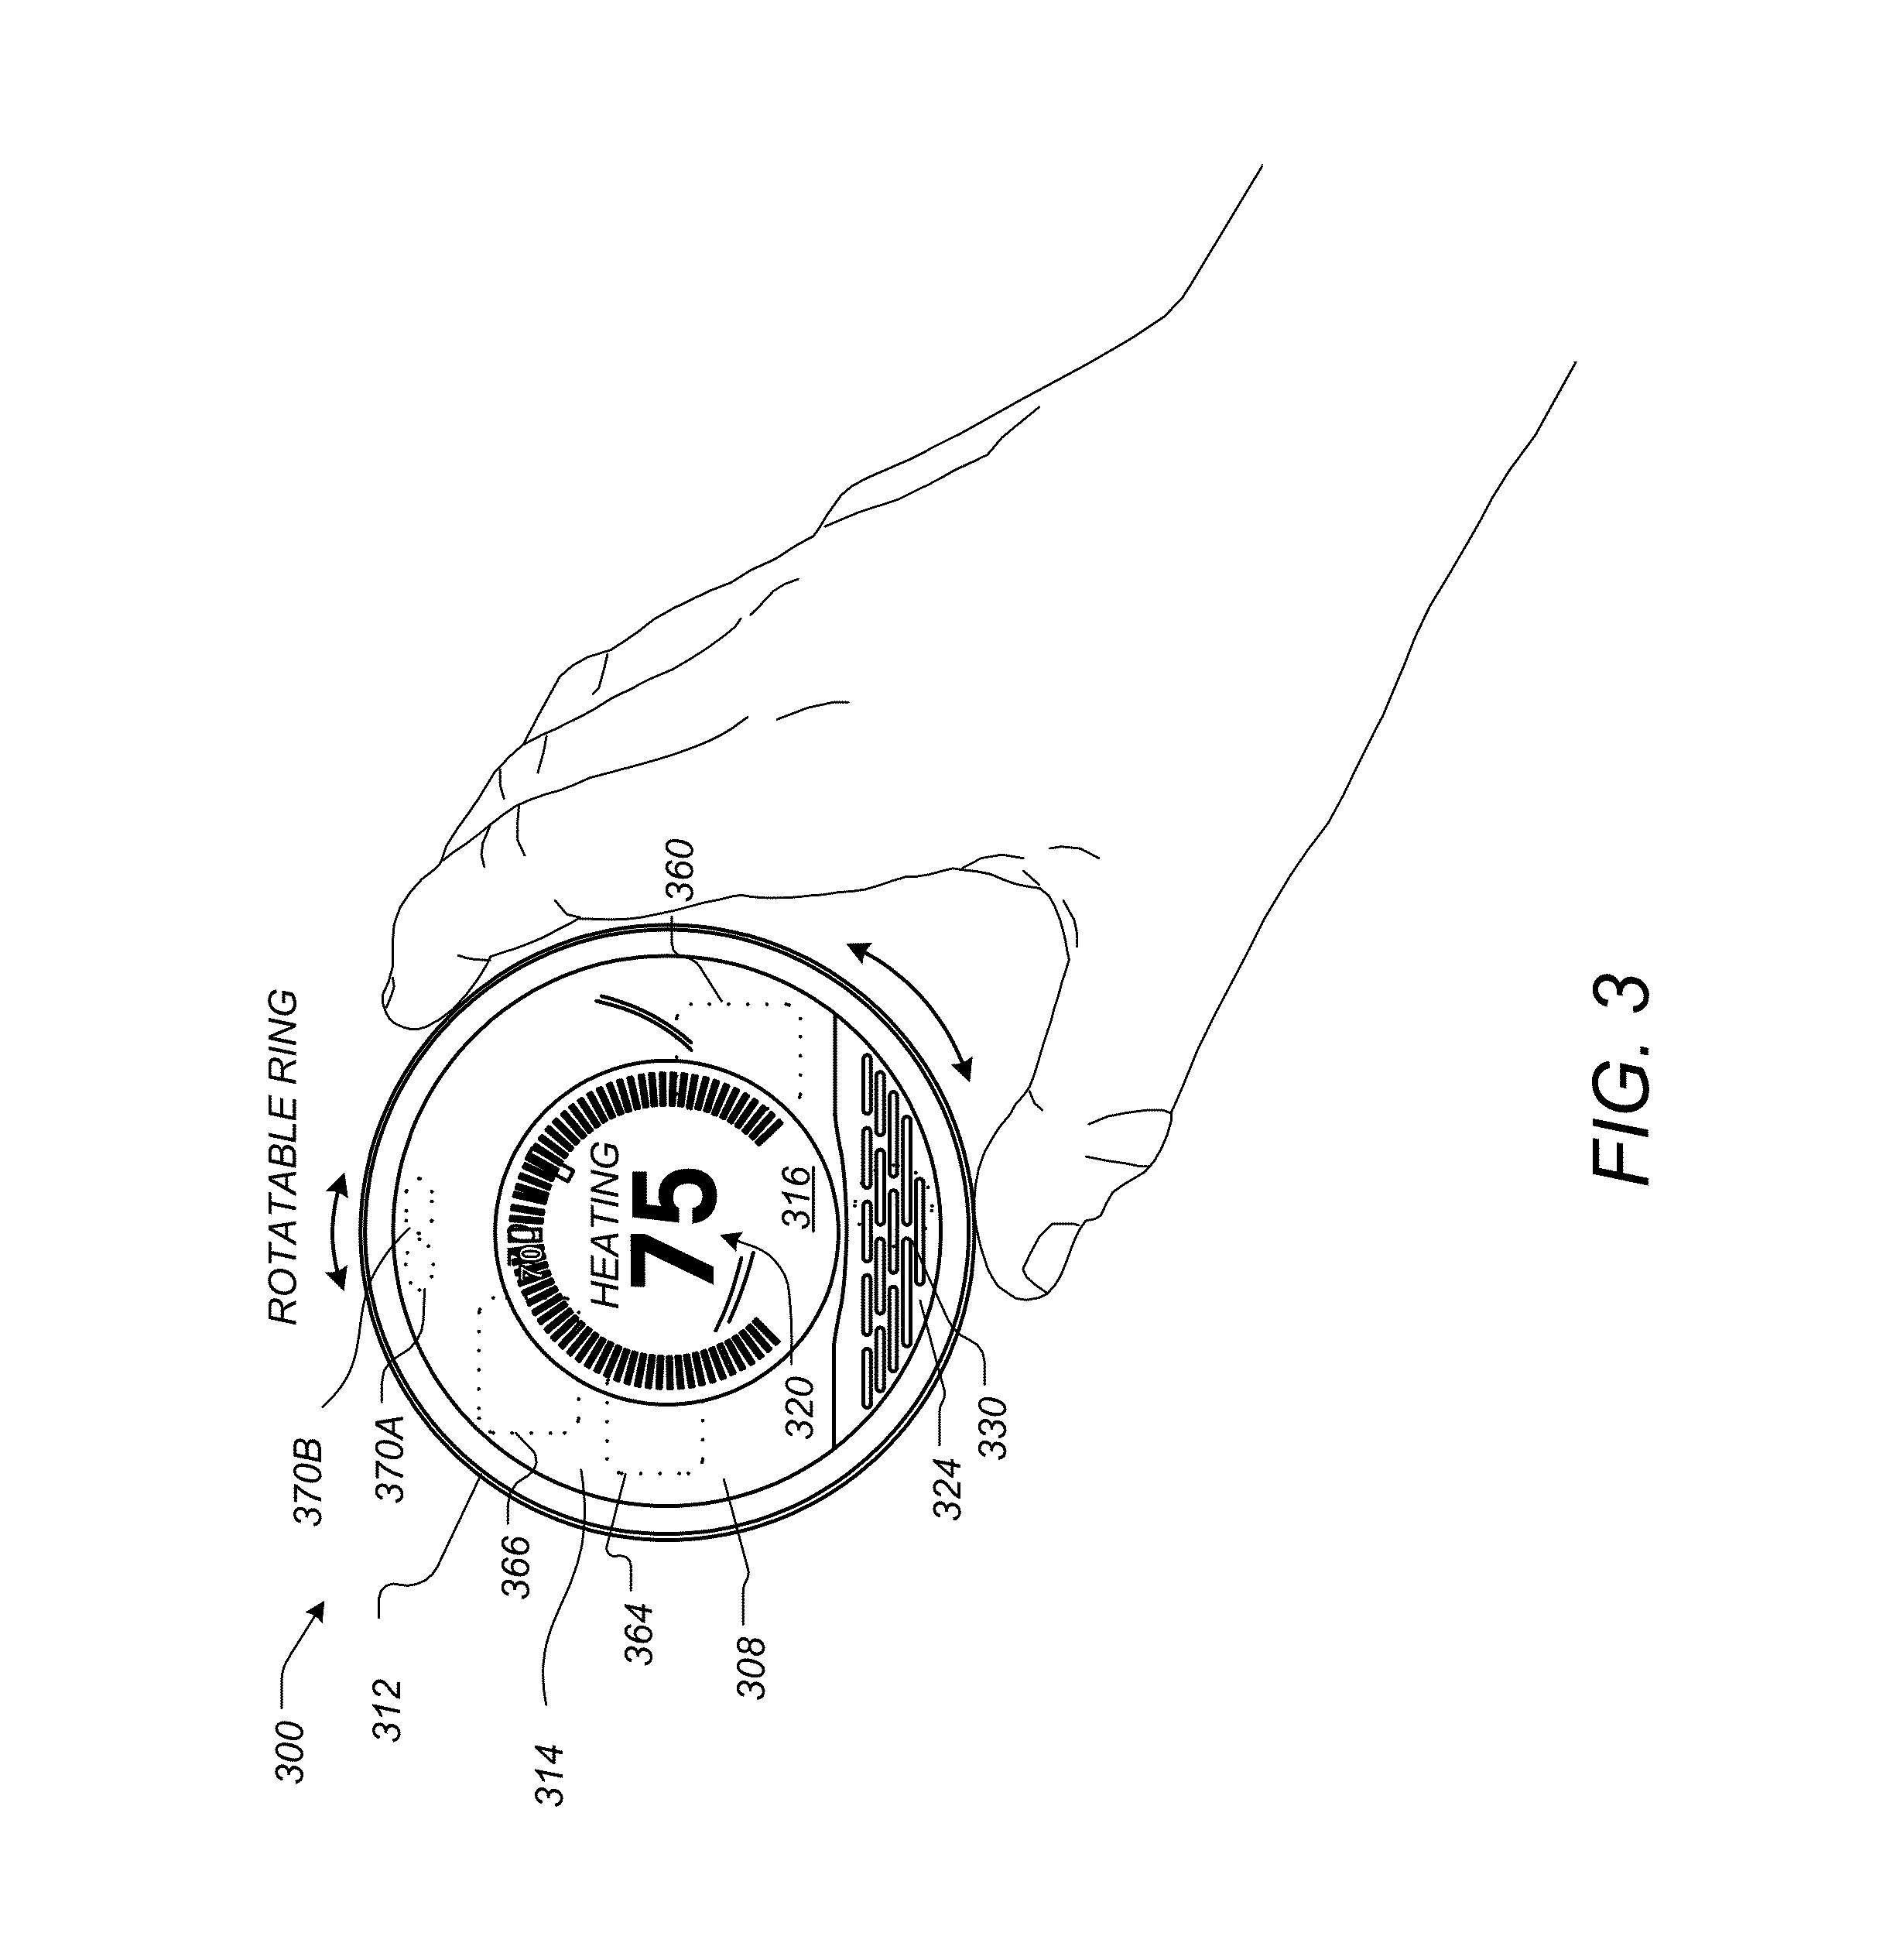 Radiant heating controls and methods for an environmental control system